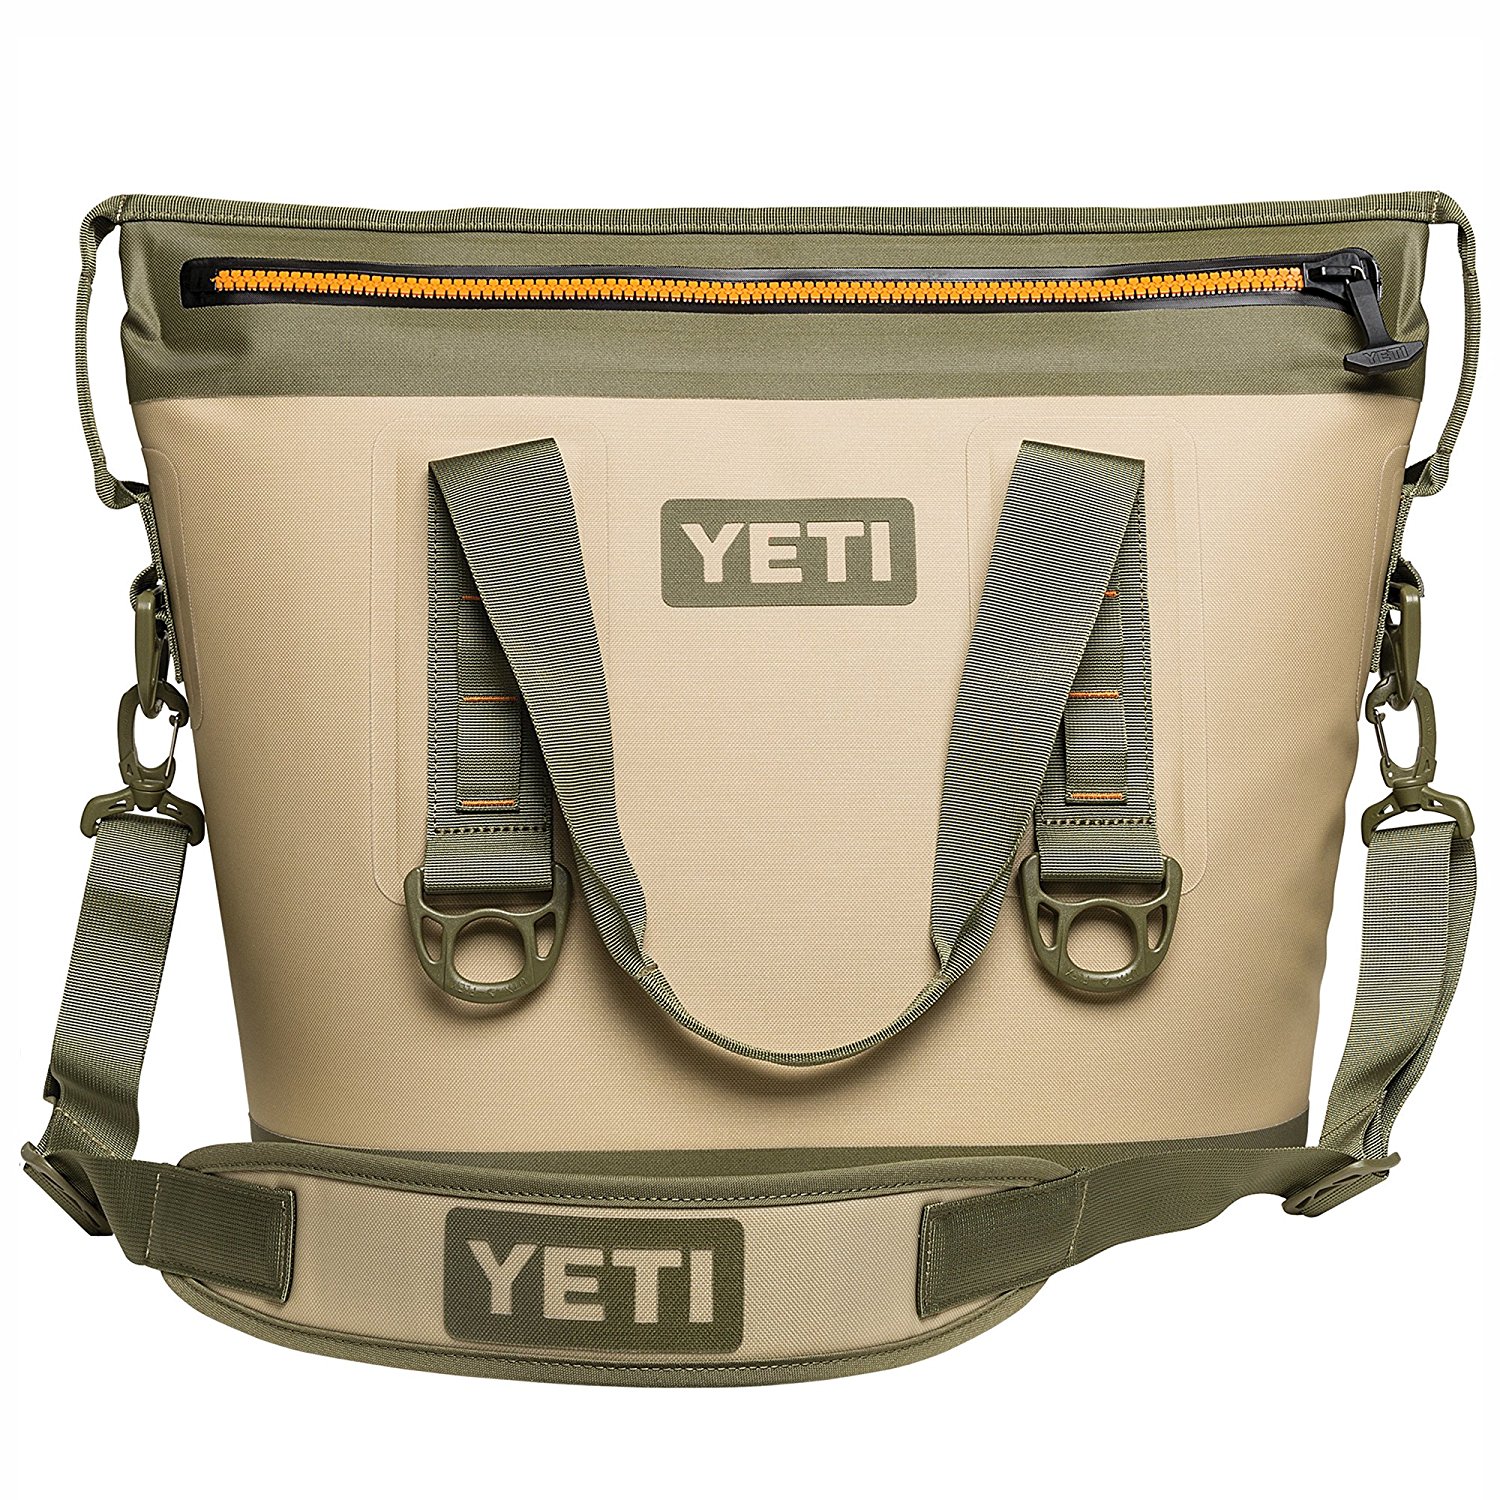 Shop This Yeti Hopper for $50 Less Than Its New Model